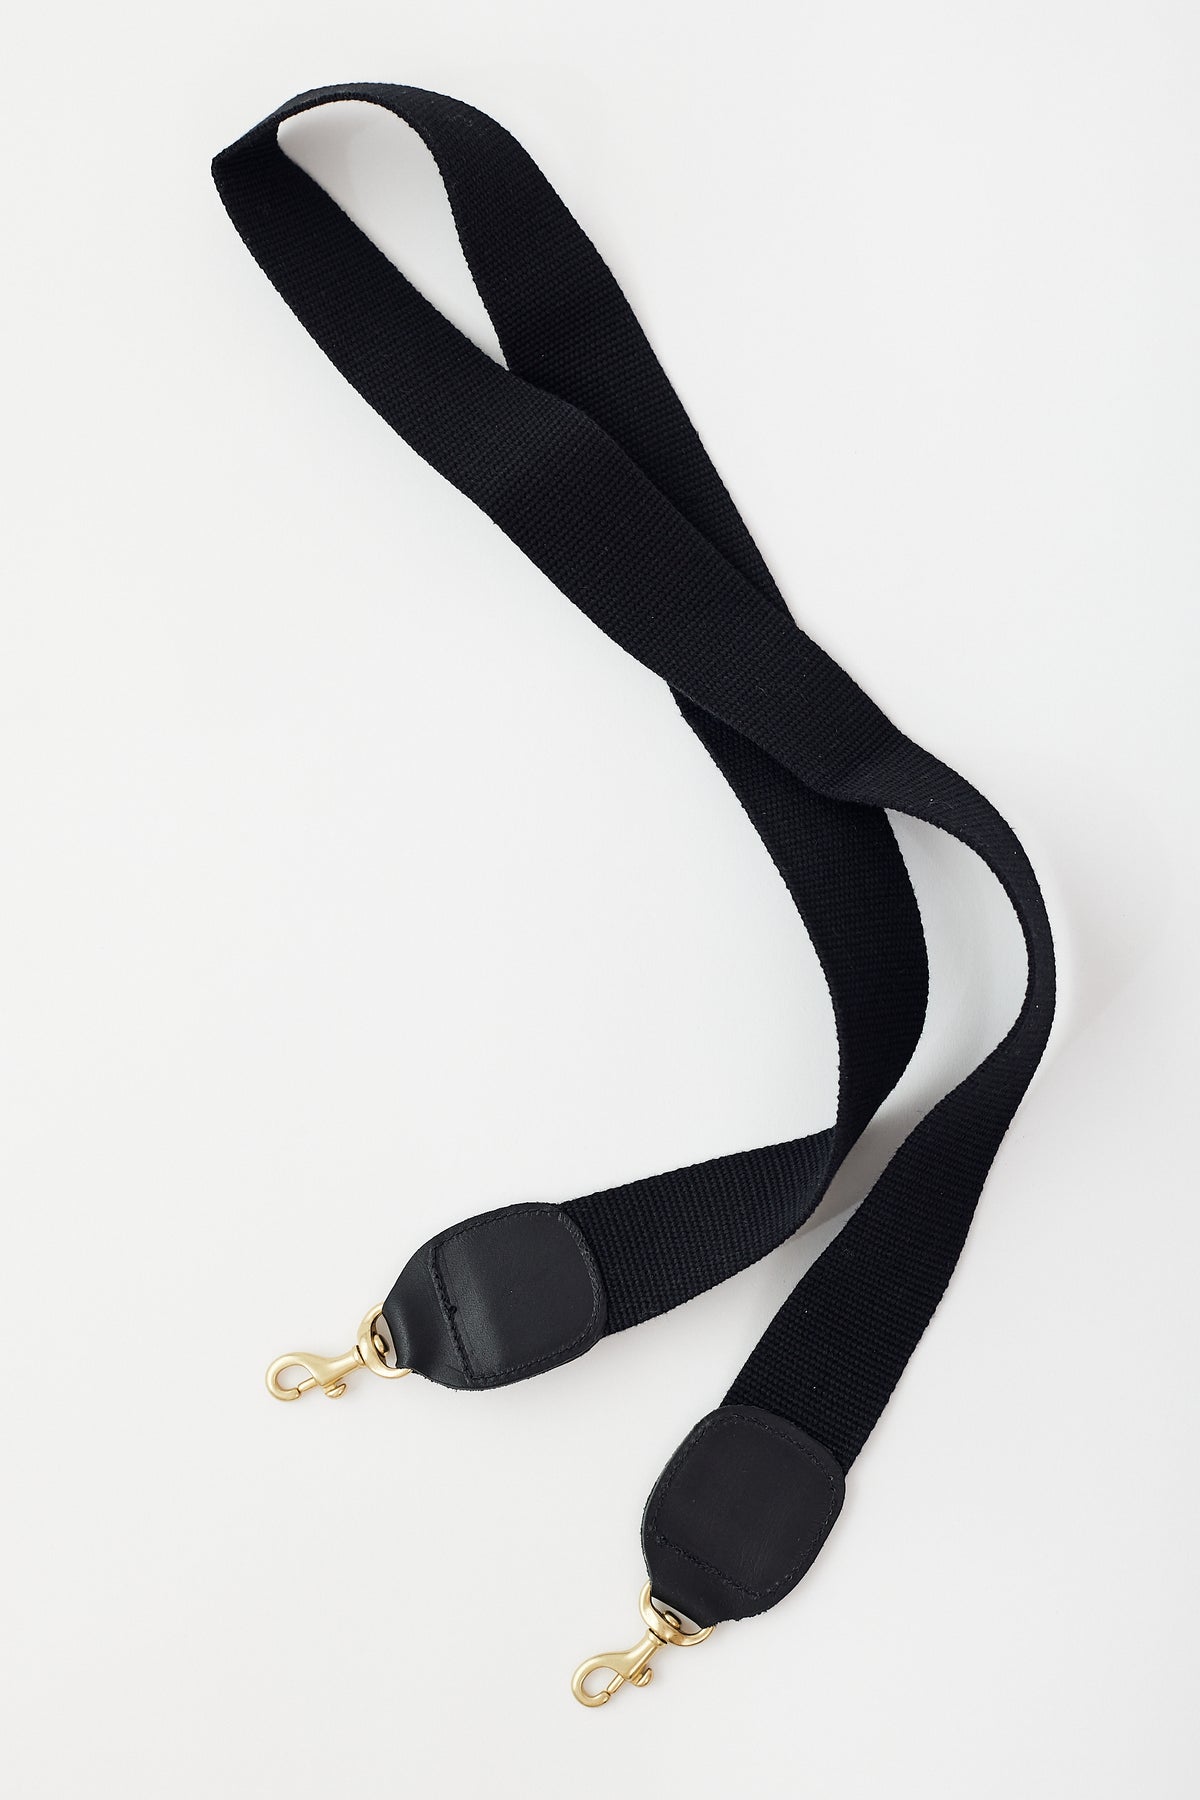 The latest collection of Braided Rope Crossbody Strap in Black Clare V.